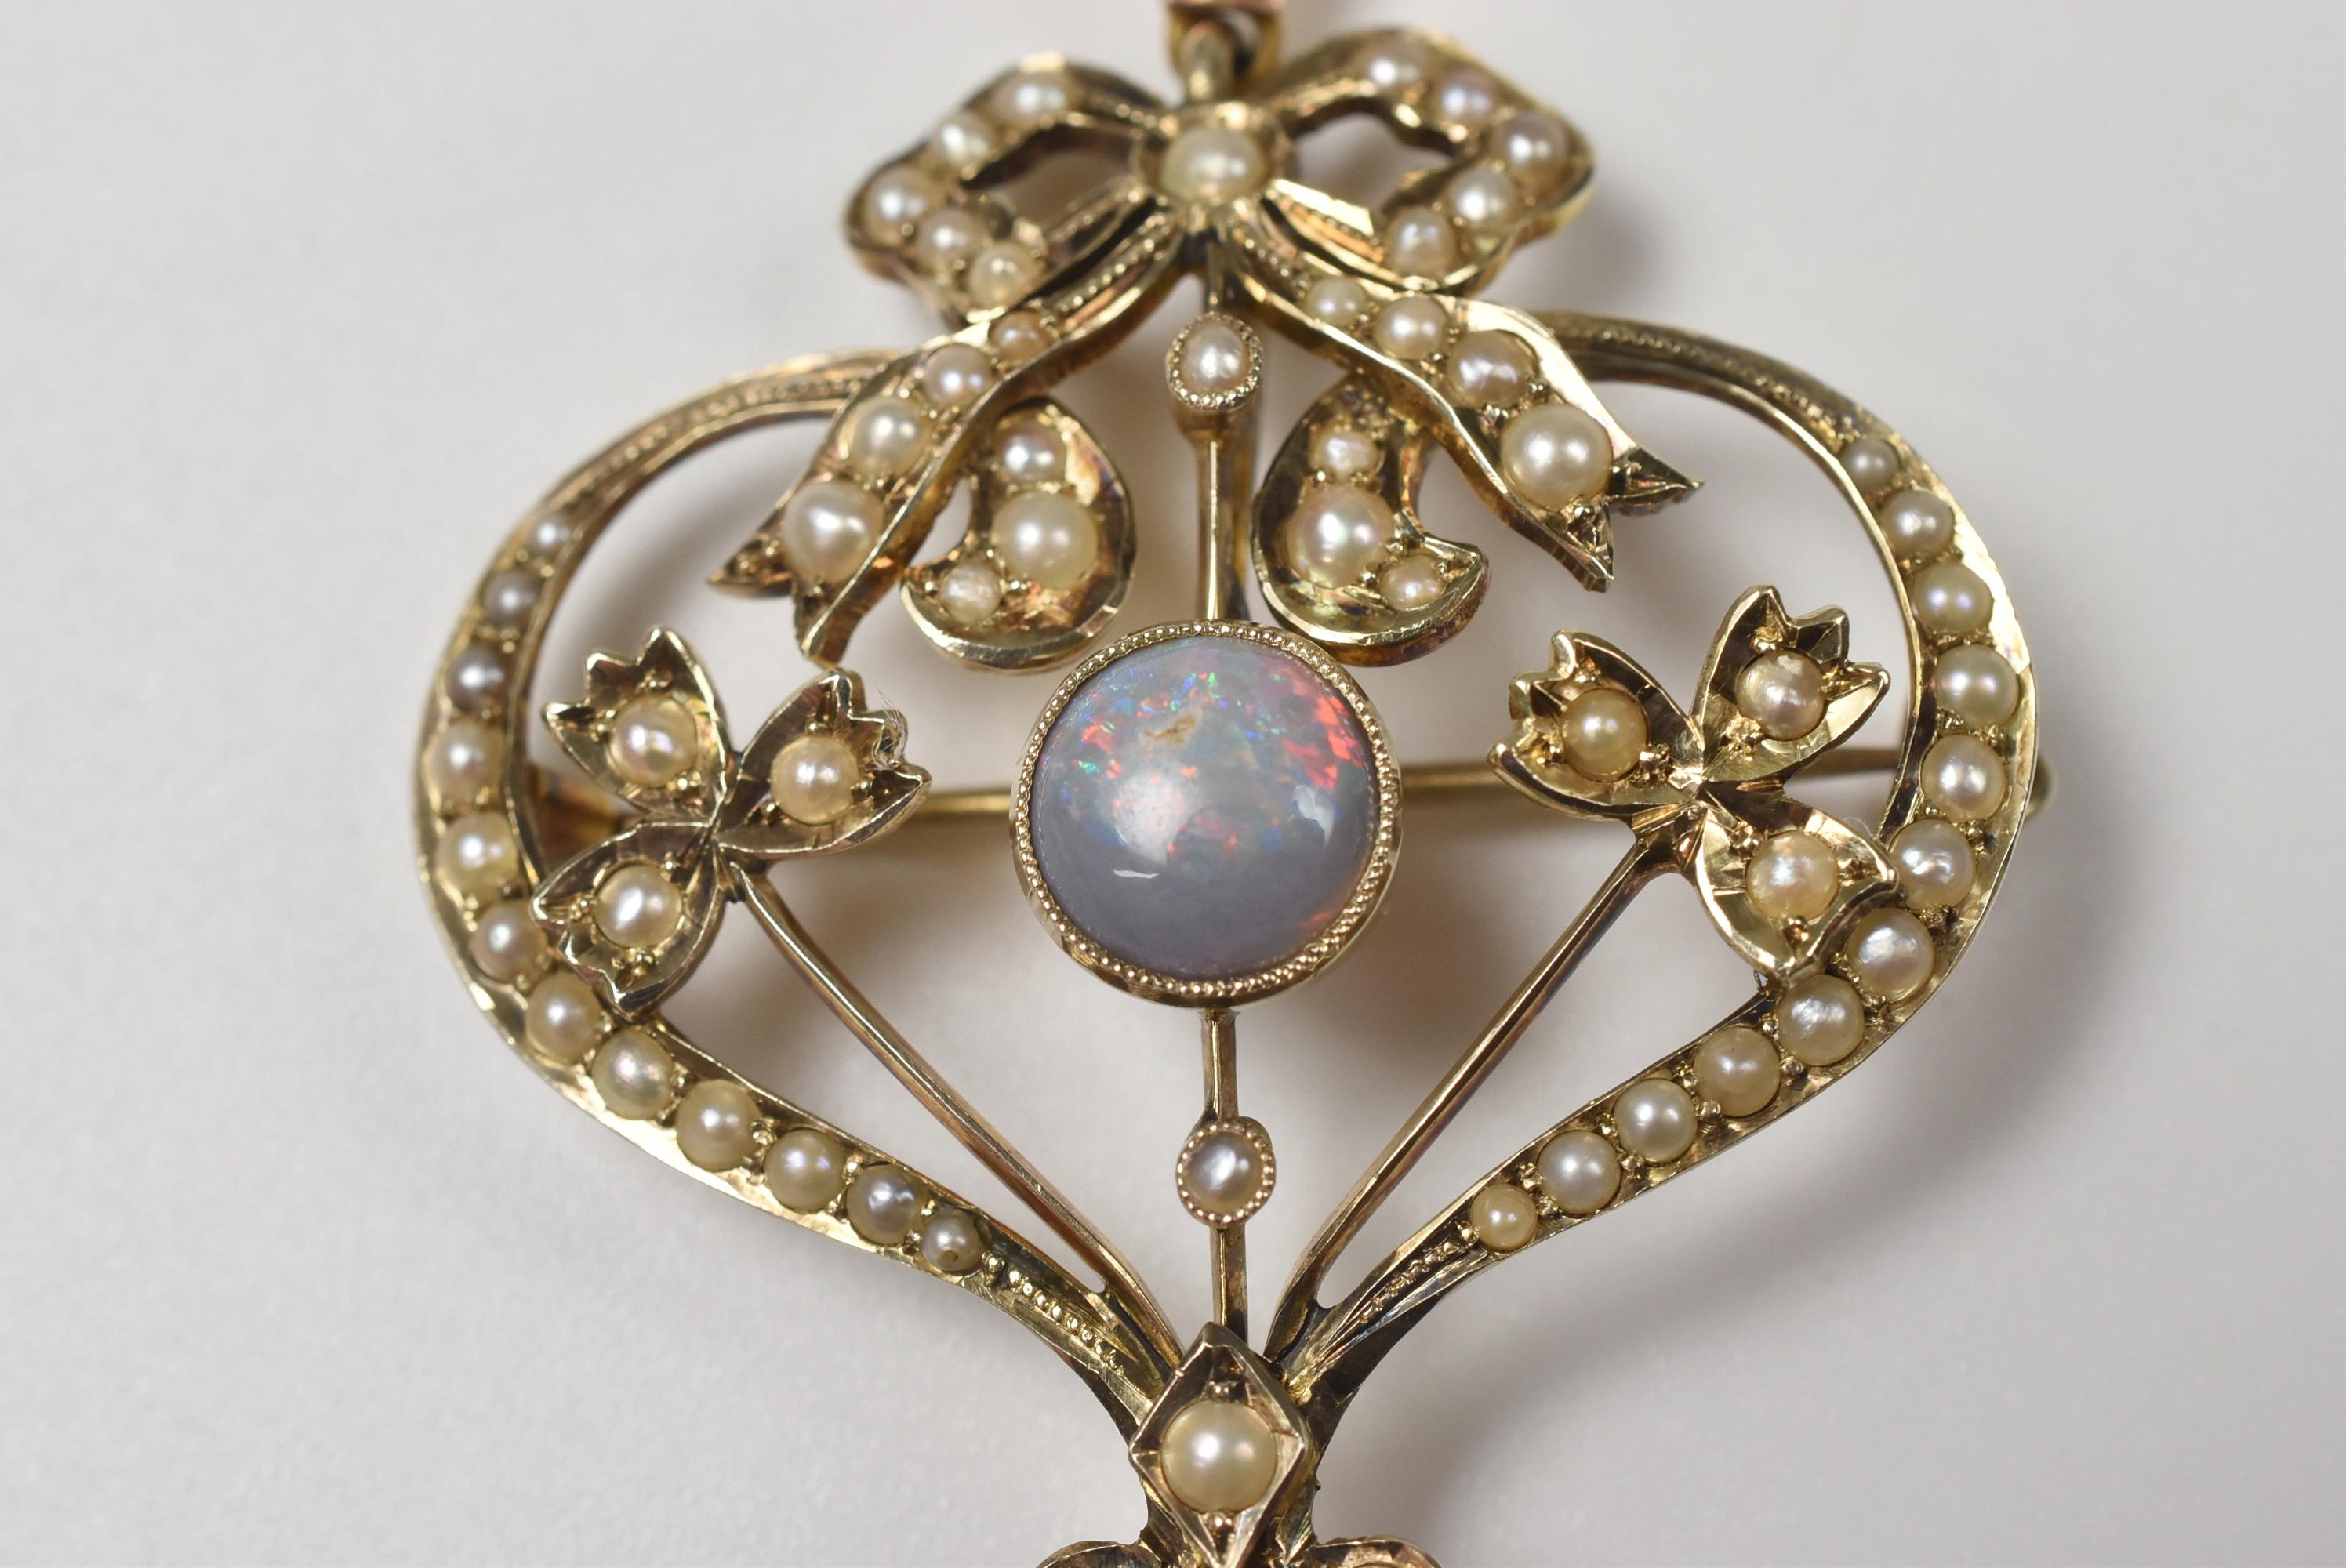 Heart shaped 9-karat gold Edwardian pendant or brooch. Central opal and an opal dangle at the bottom, surrounded by seed pearl bow, and flowers accents. Measures: 2 1/4